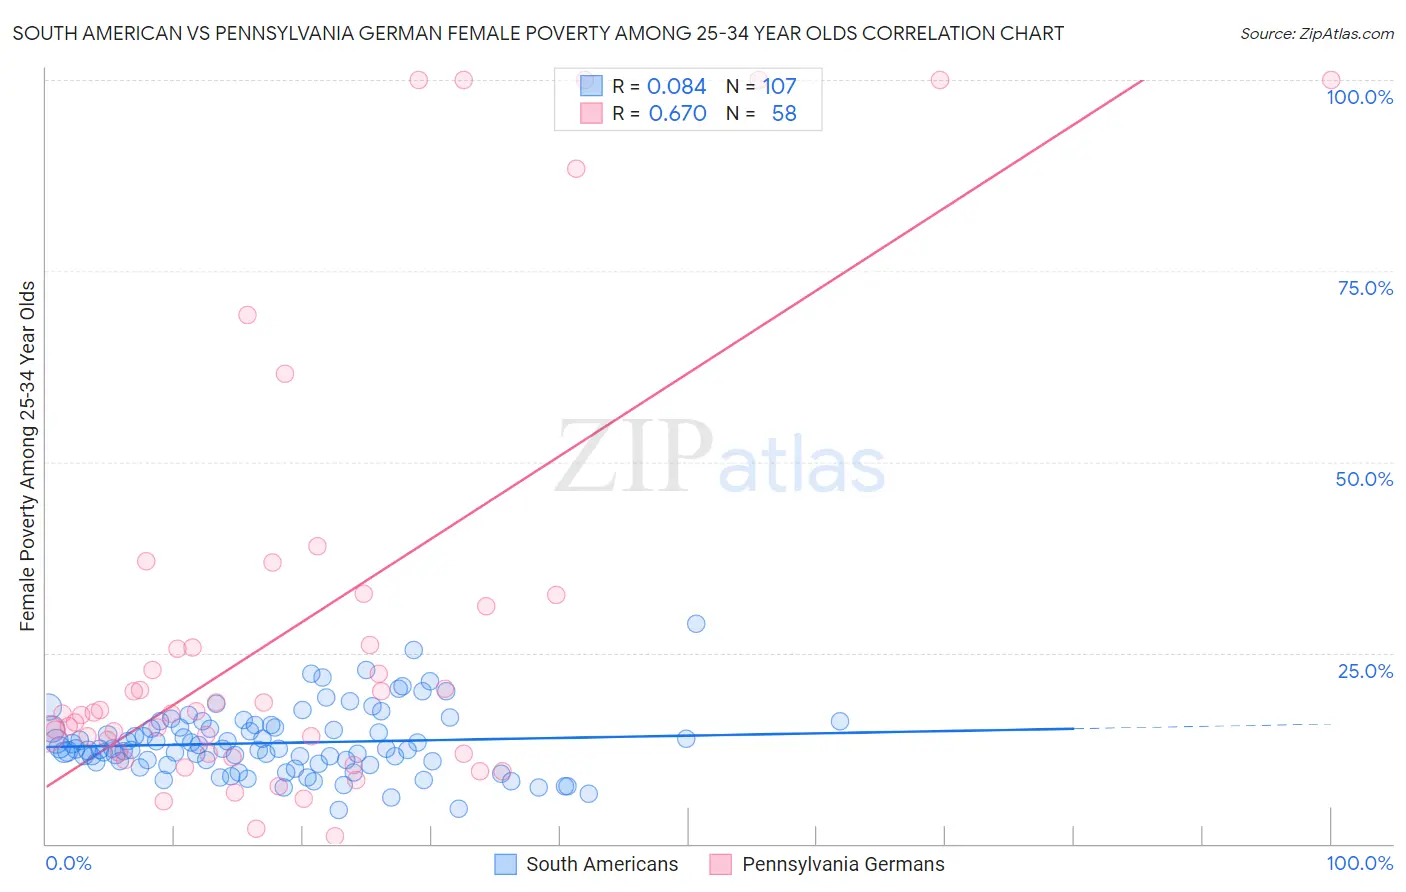 South American vs Pennsylvania German Female Poverty Among 25-34 Year Olds